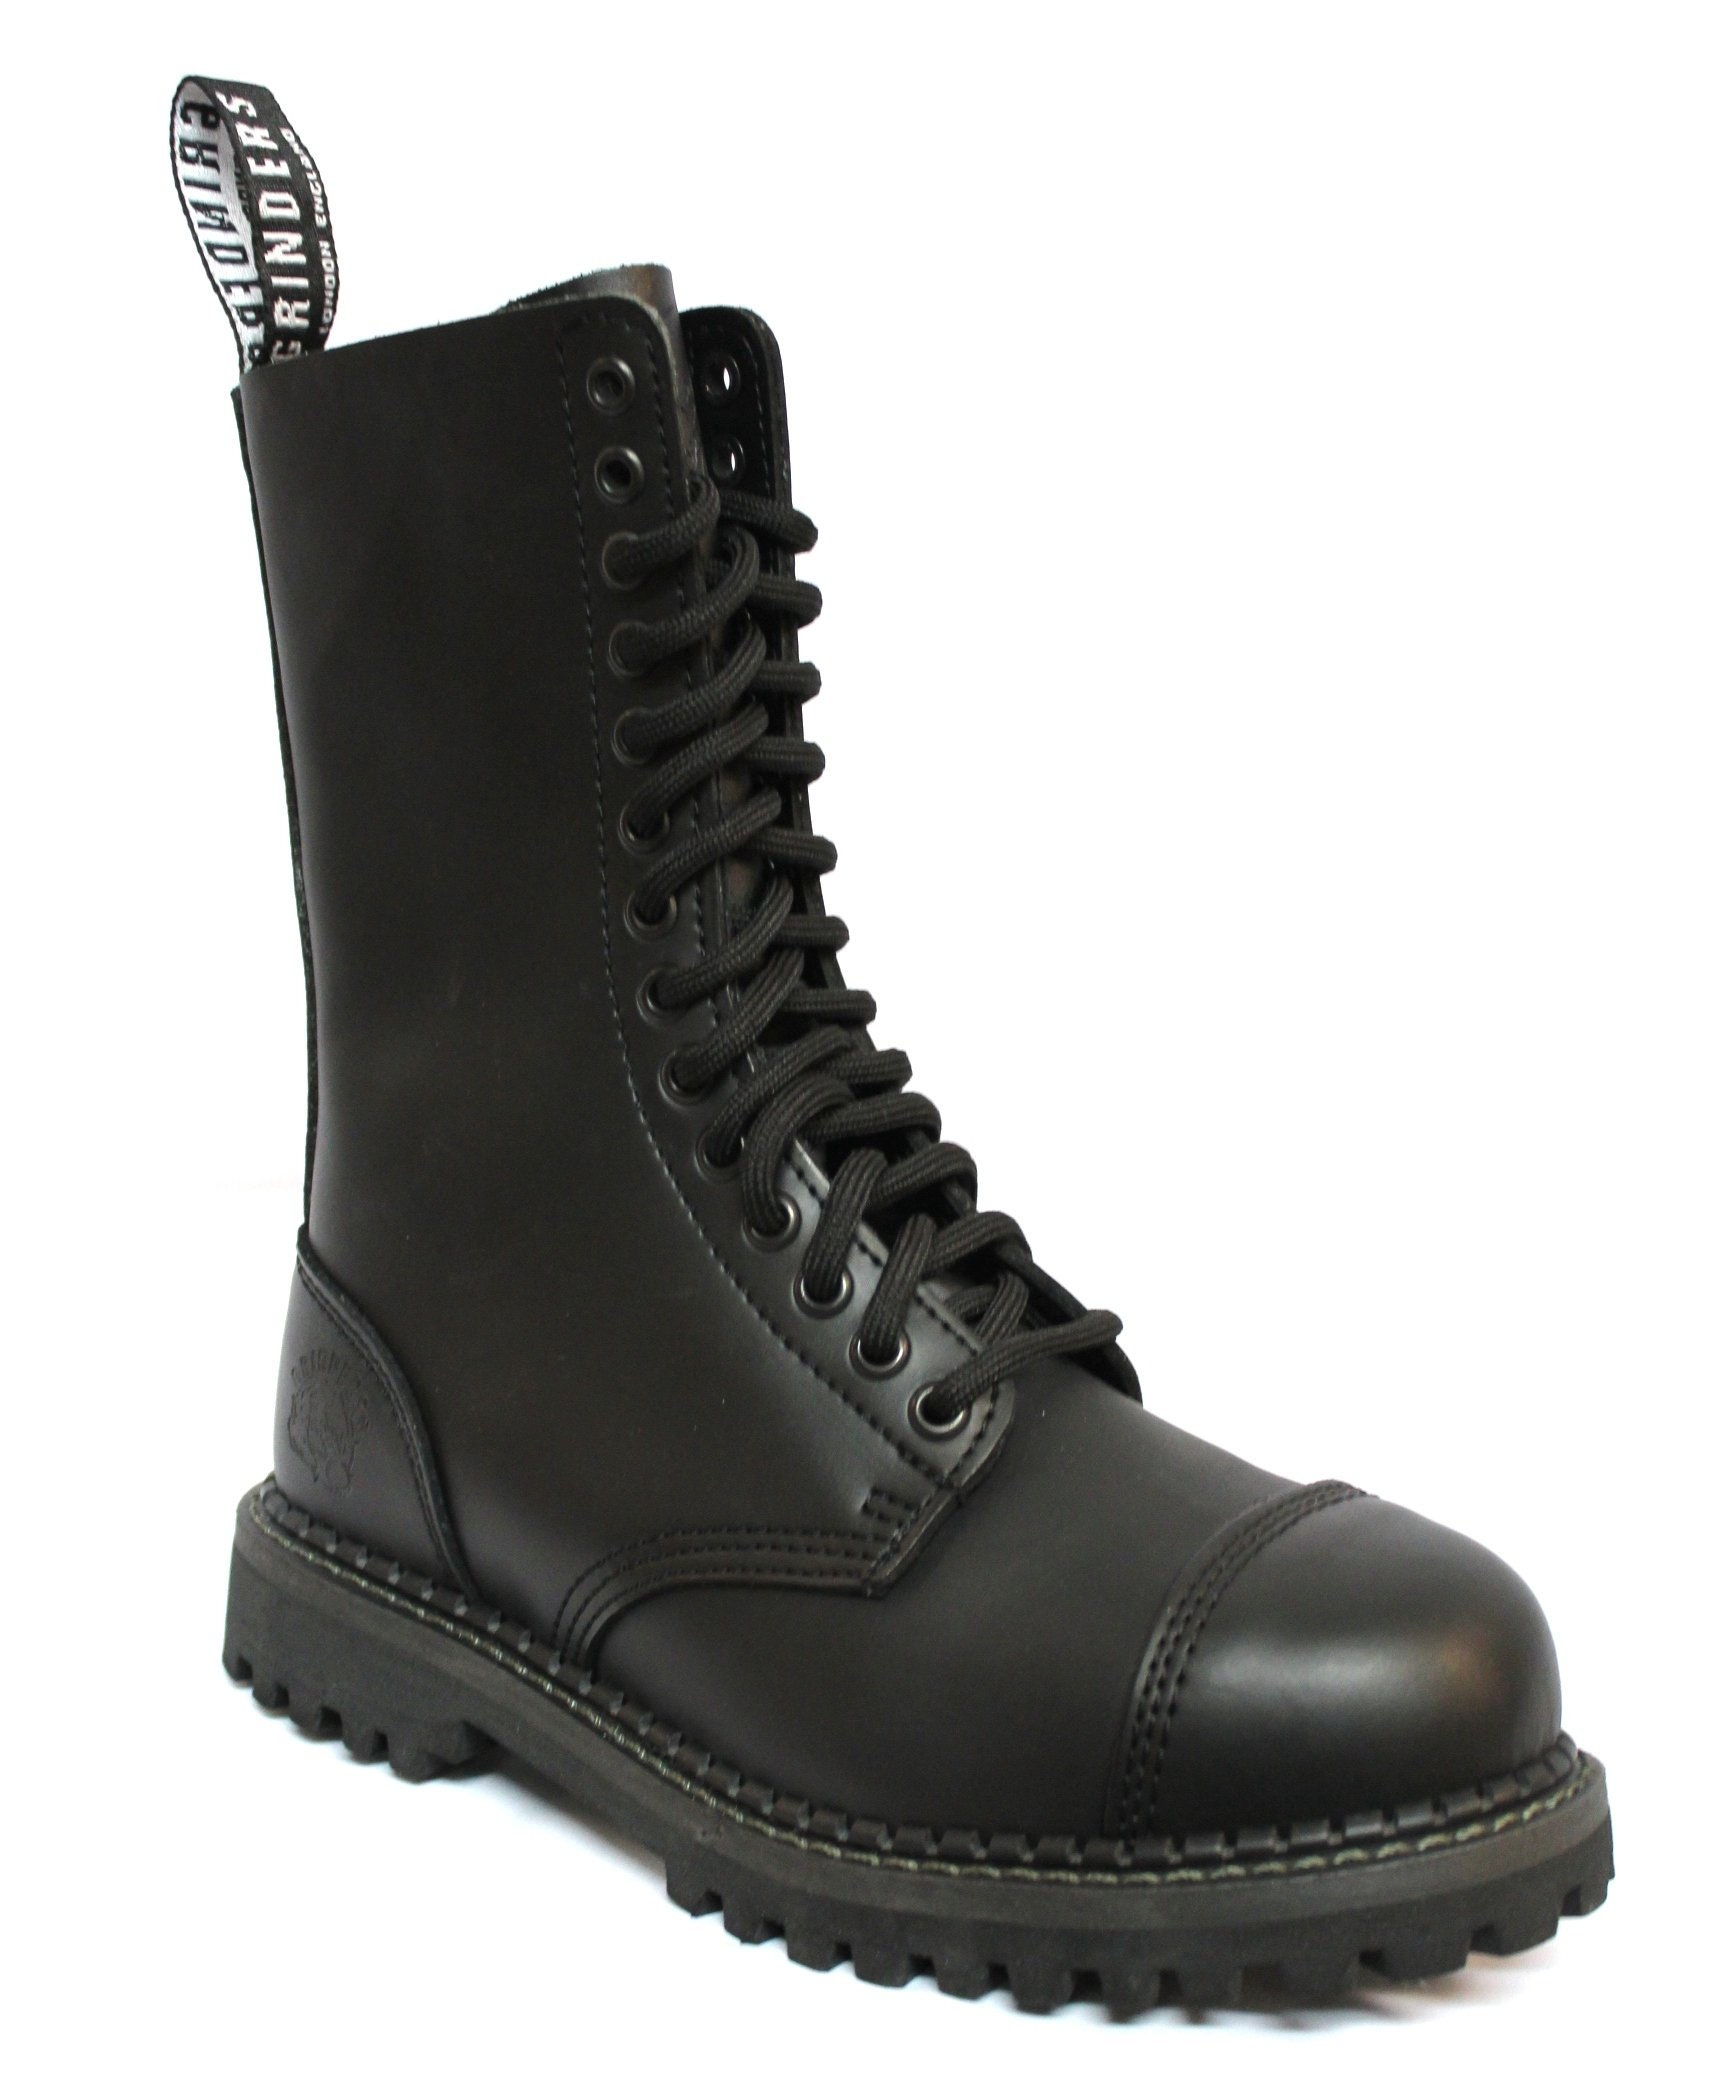 Herald Cs Safety Steel Toe Cap Black Smart Lace up Boots - Etsy